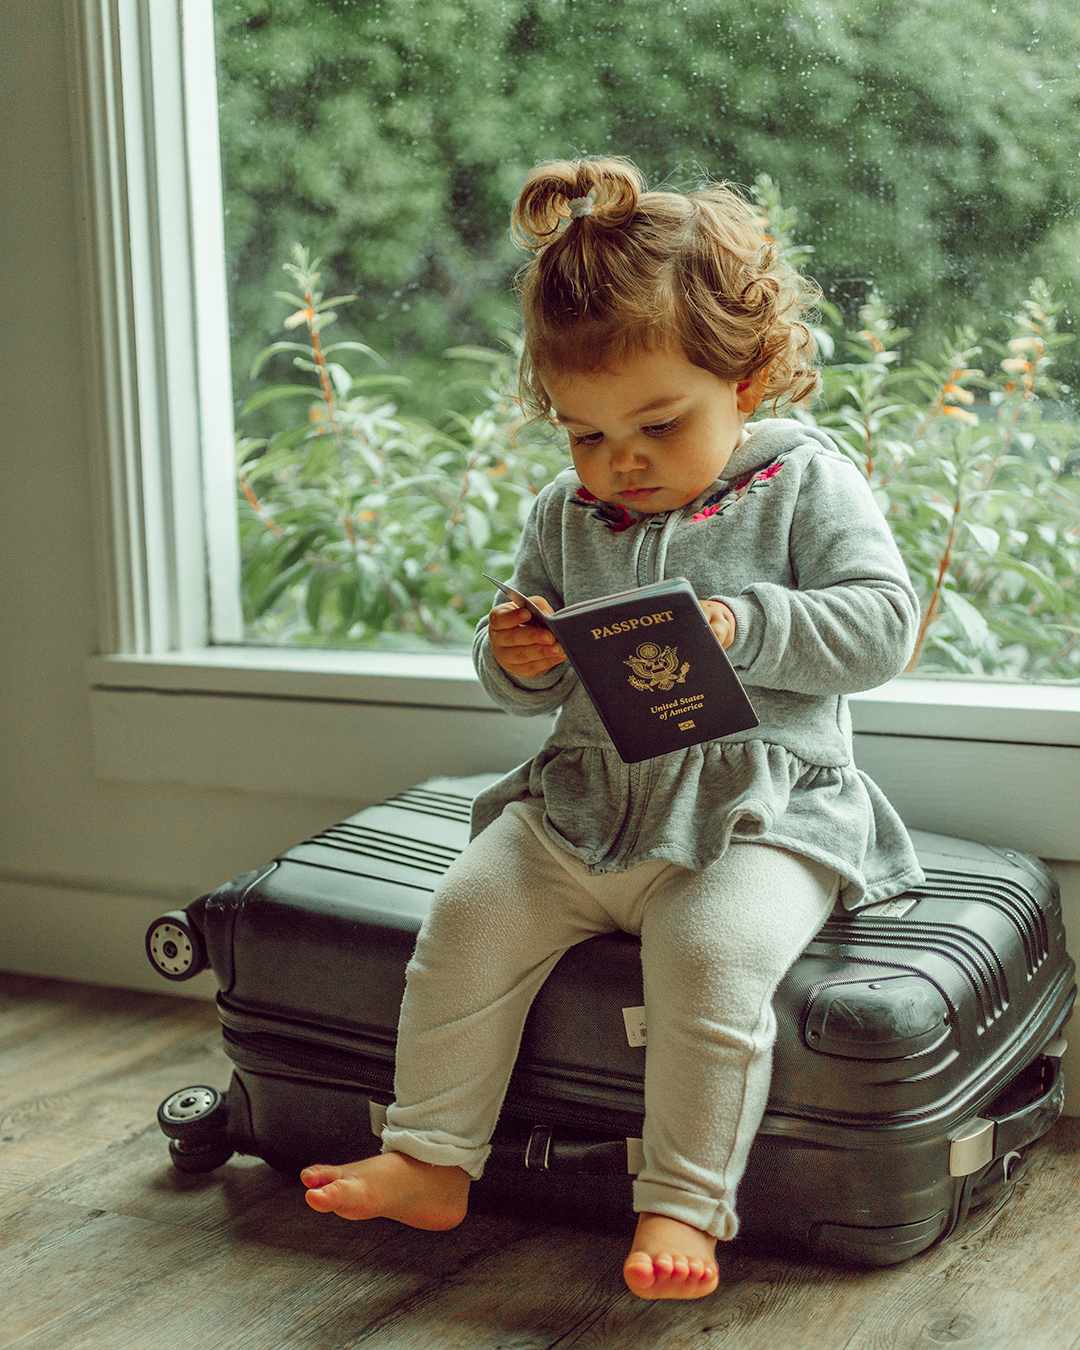 Step-by-Step Travel Guide For Flying With a Toddler